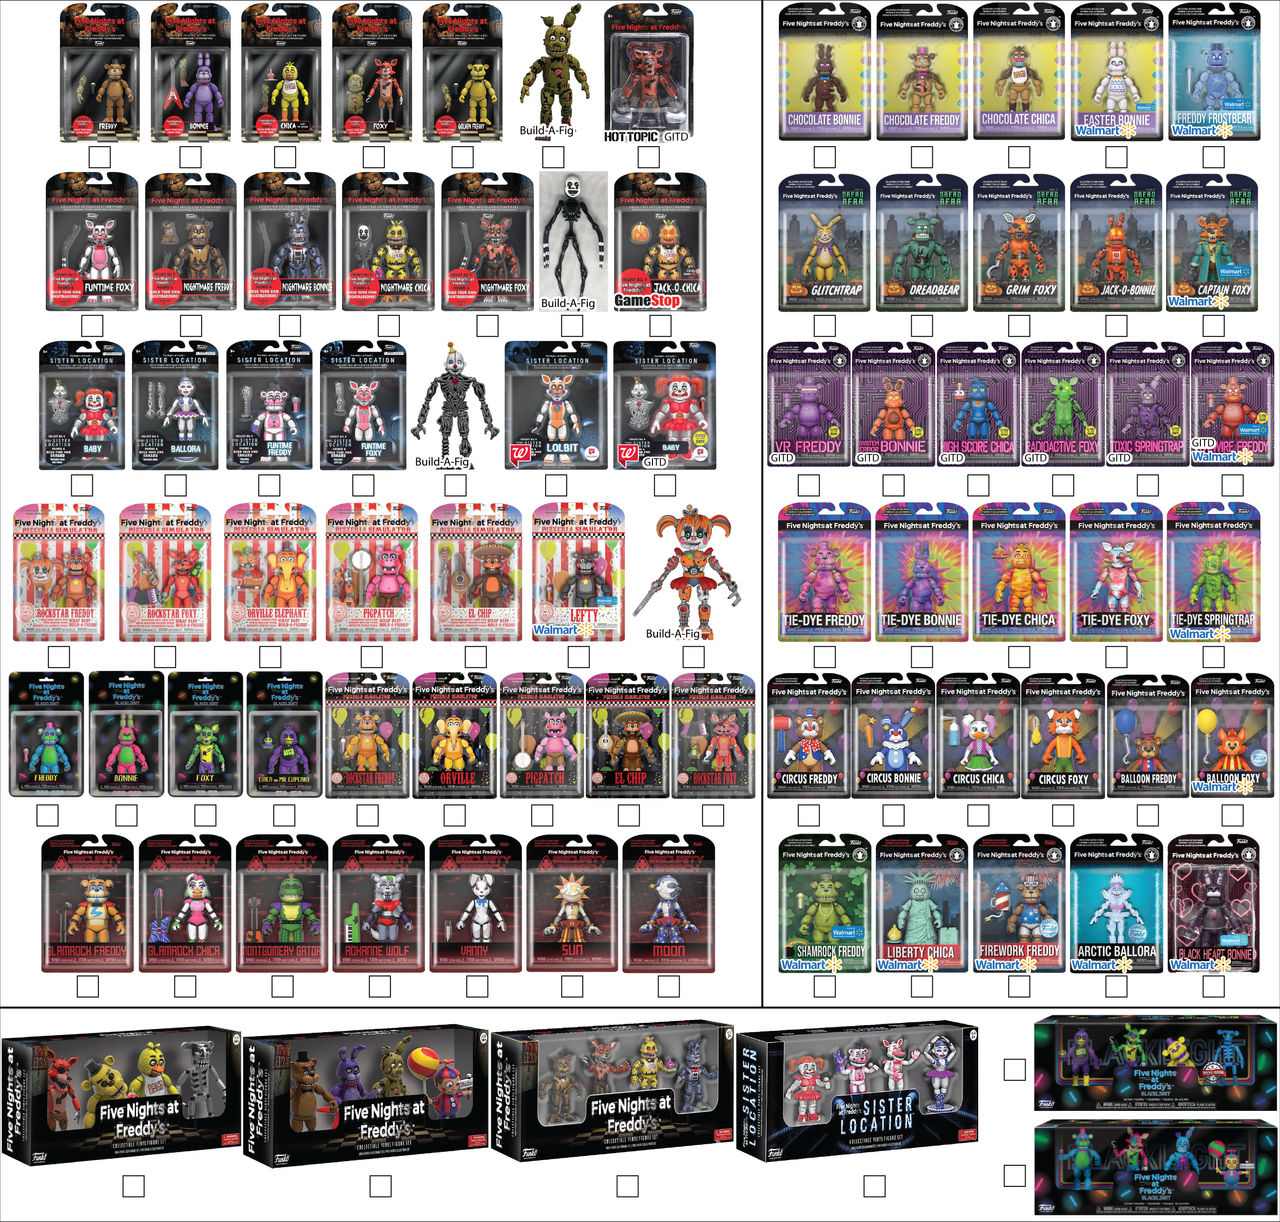 FIVE NIGHTS AT FREDDY'S FNAF HANGERS SERIES 2 SET OF 10 COLLECTOR